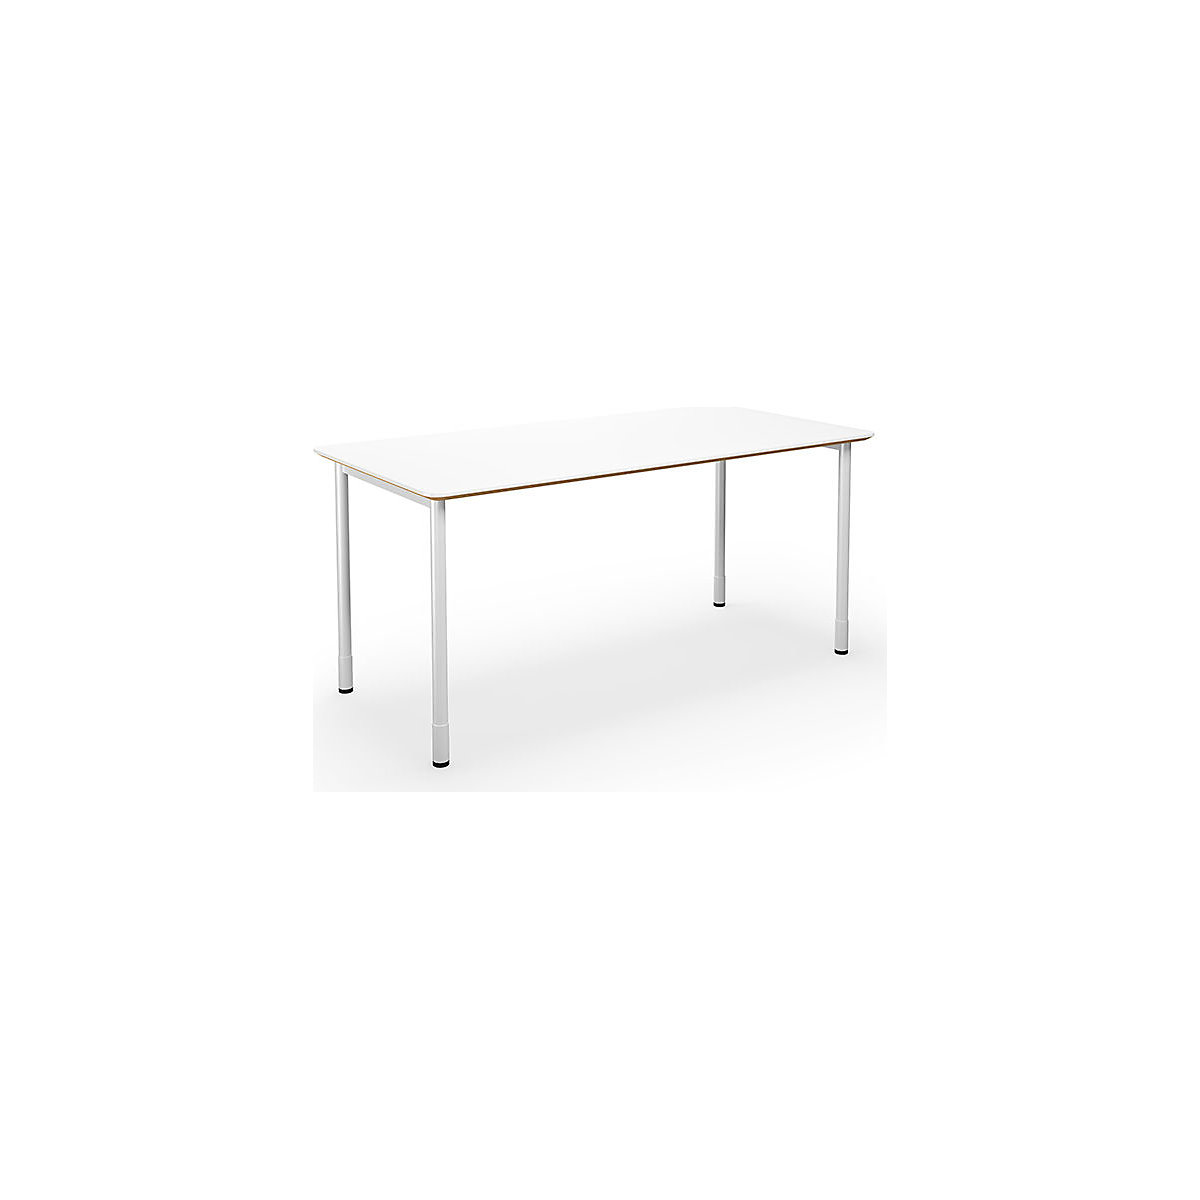 DUO-C Trend multi-purpose desk, straight tabletop, rounded corners, WxD 1600 x 800 mm, white, white-3